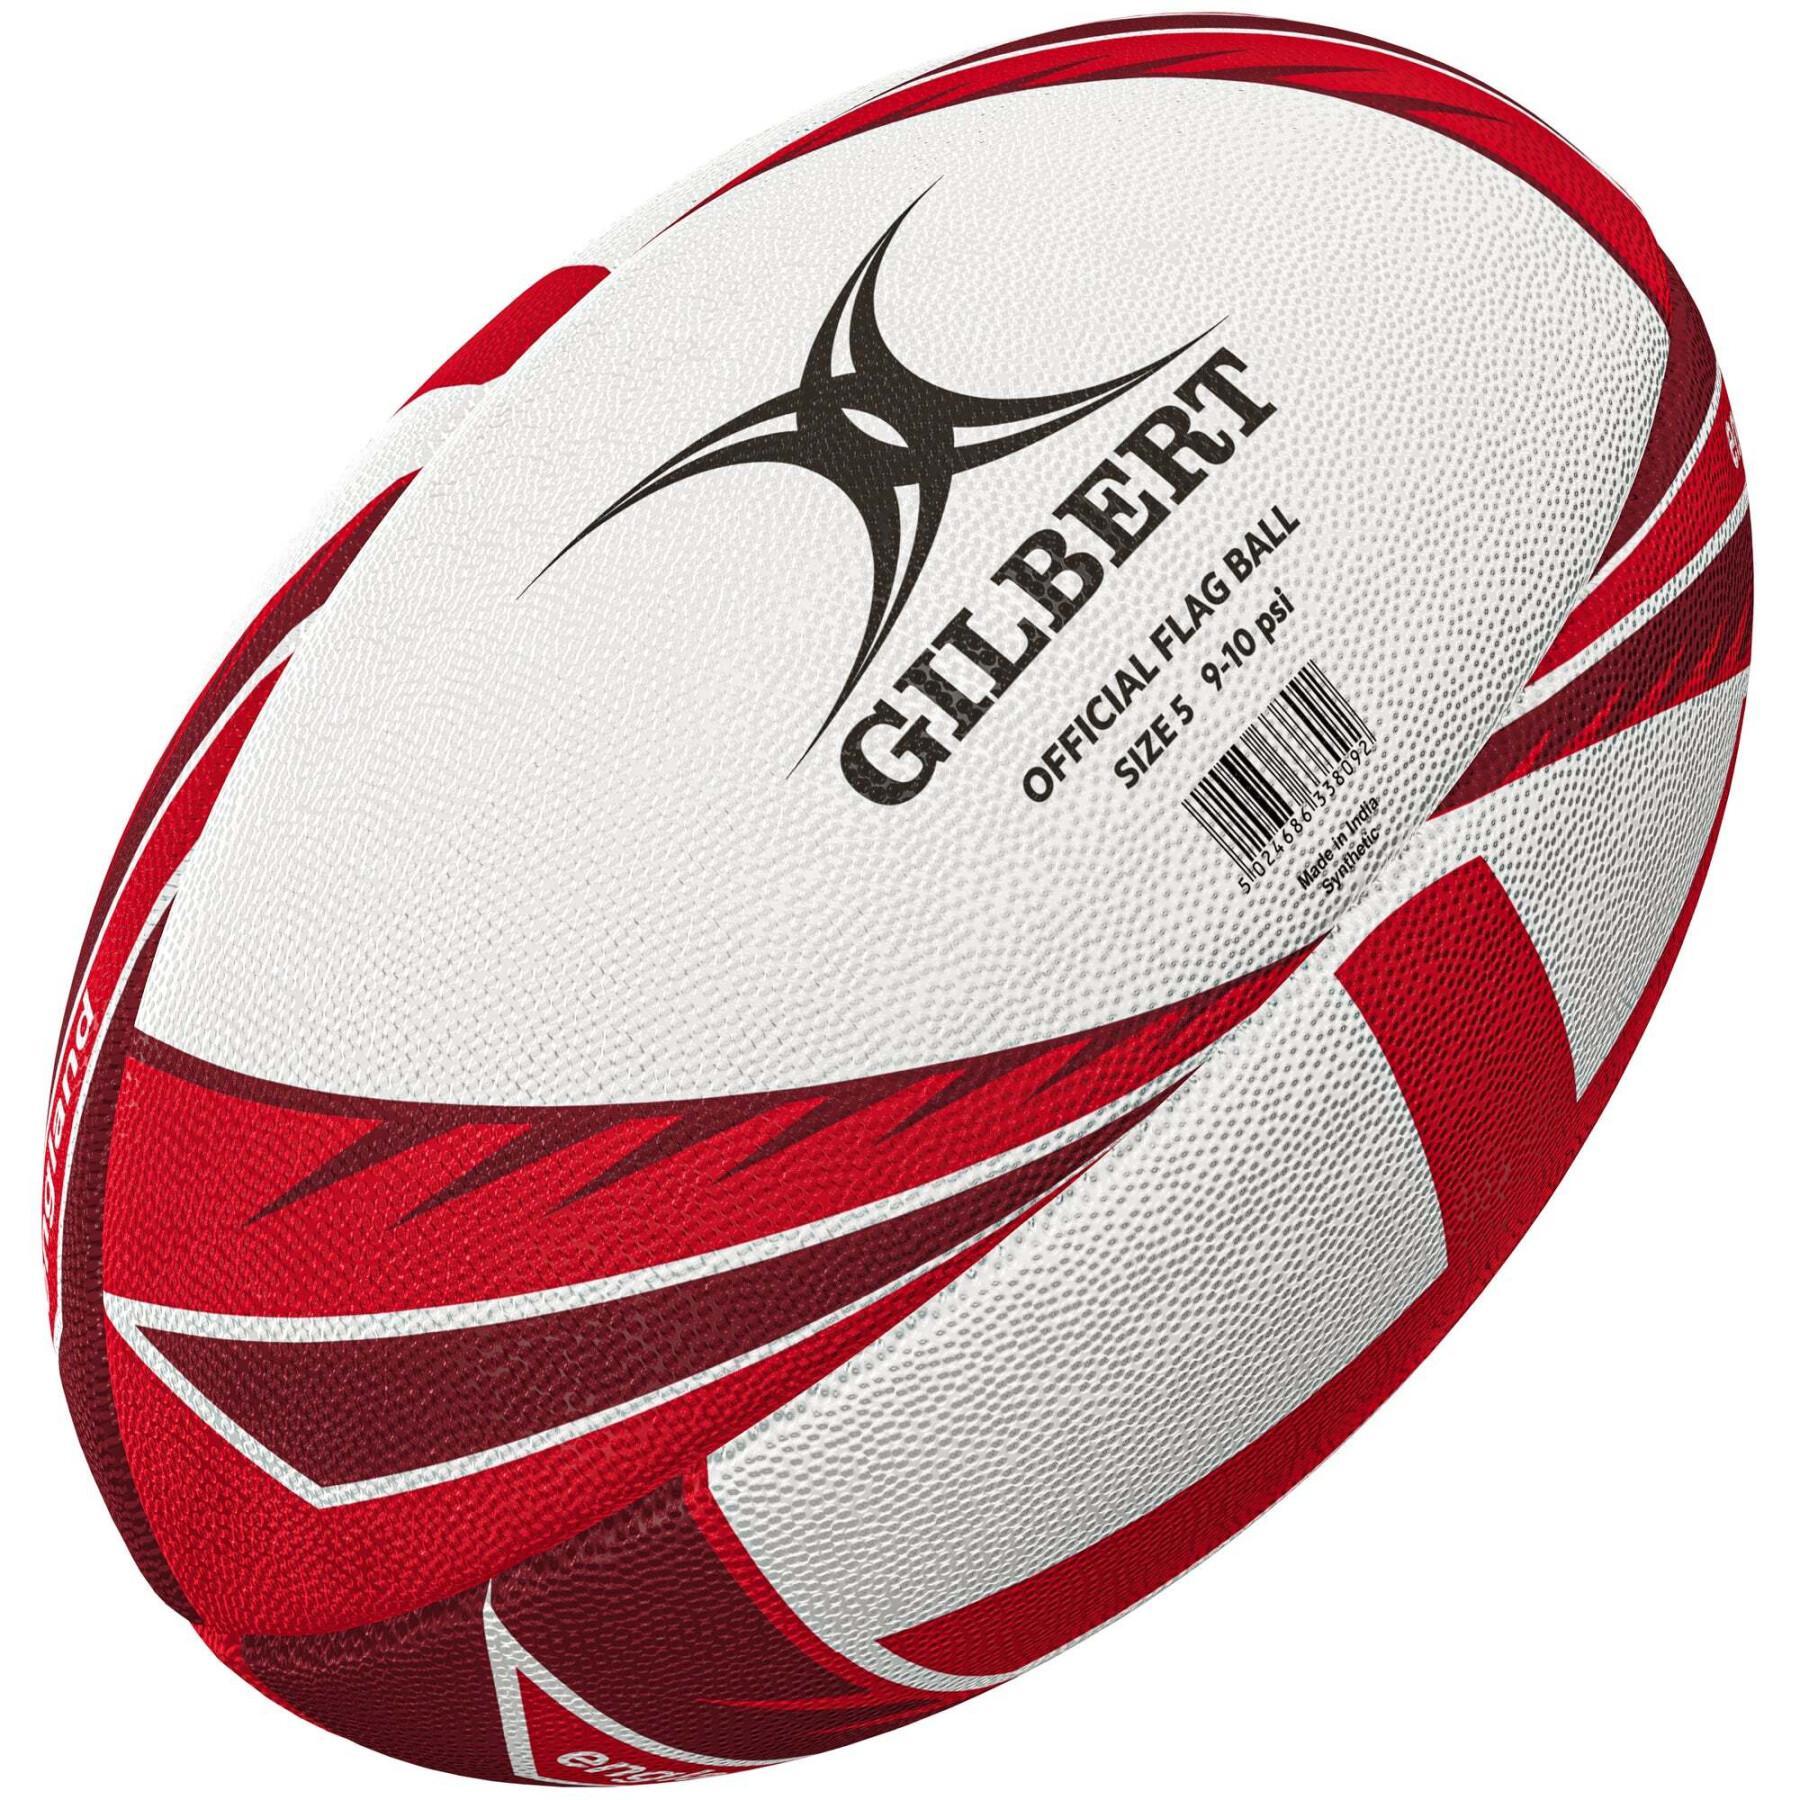 Pallone da rugby Angleterre Rugby Wolrd Cup 2021